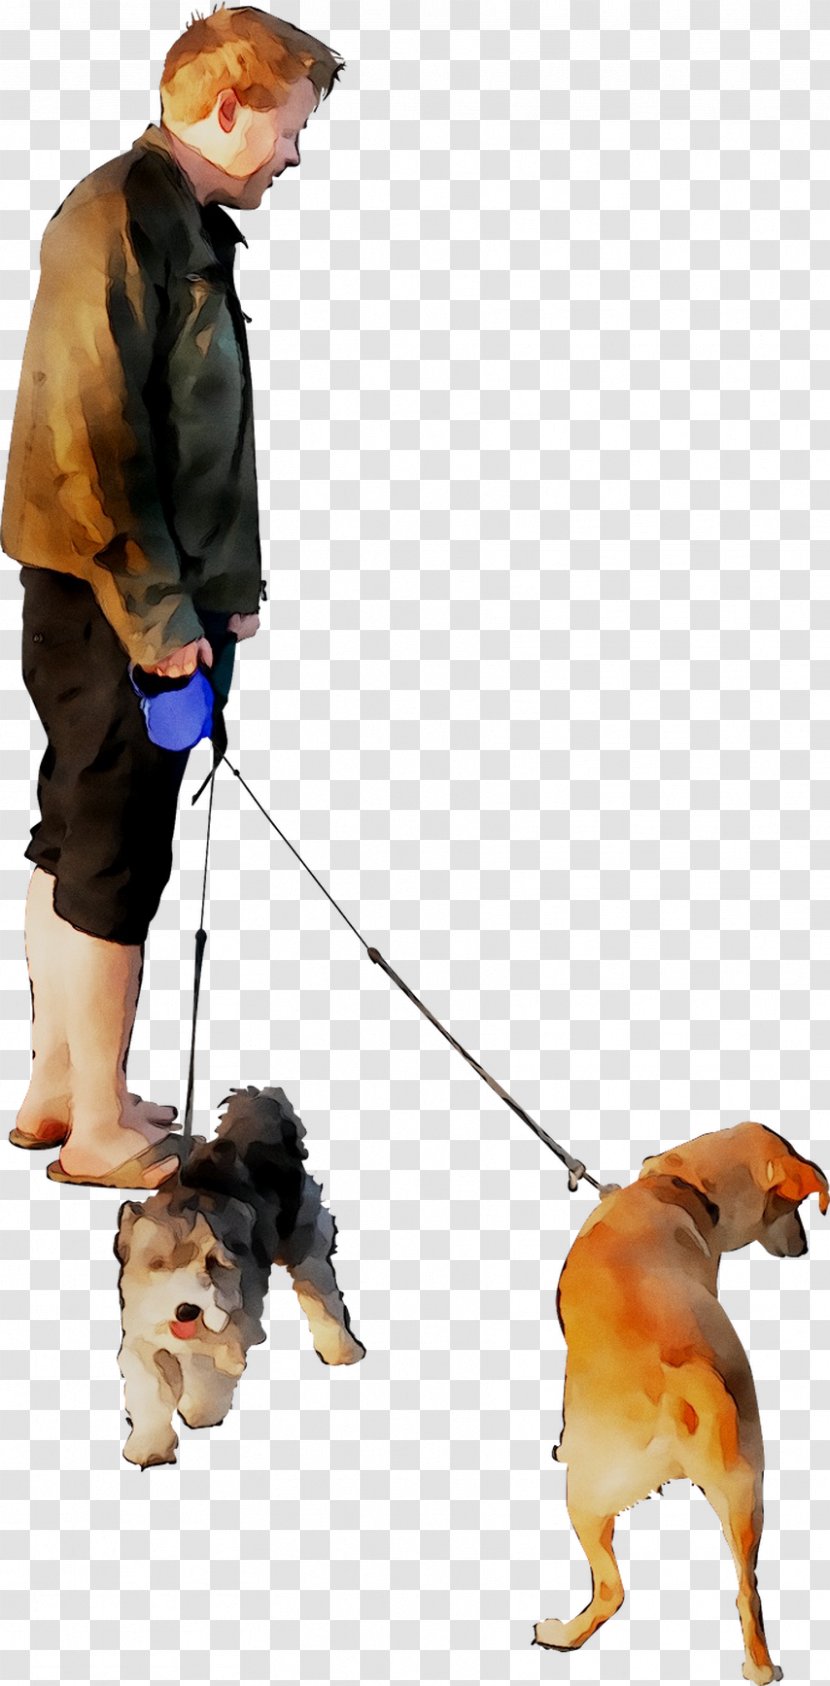 Dog Breed Obedience Training Leash Walking - Trial Transparent PNG